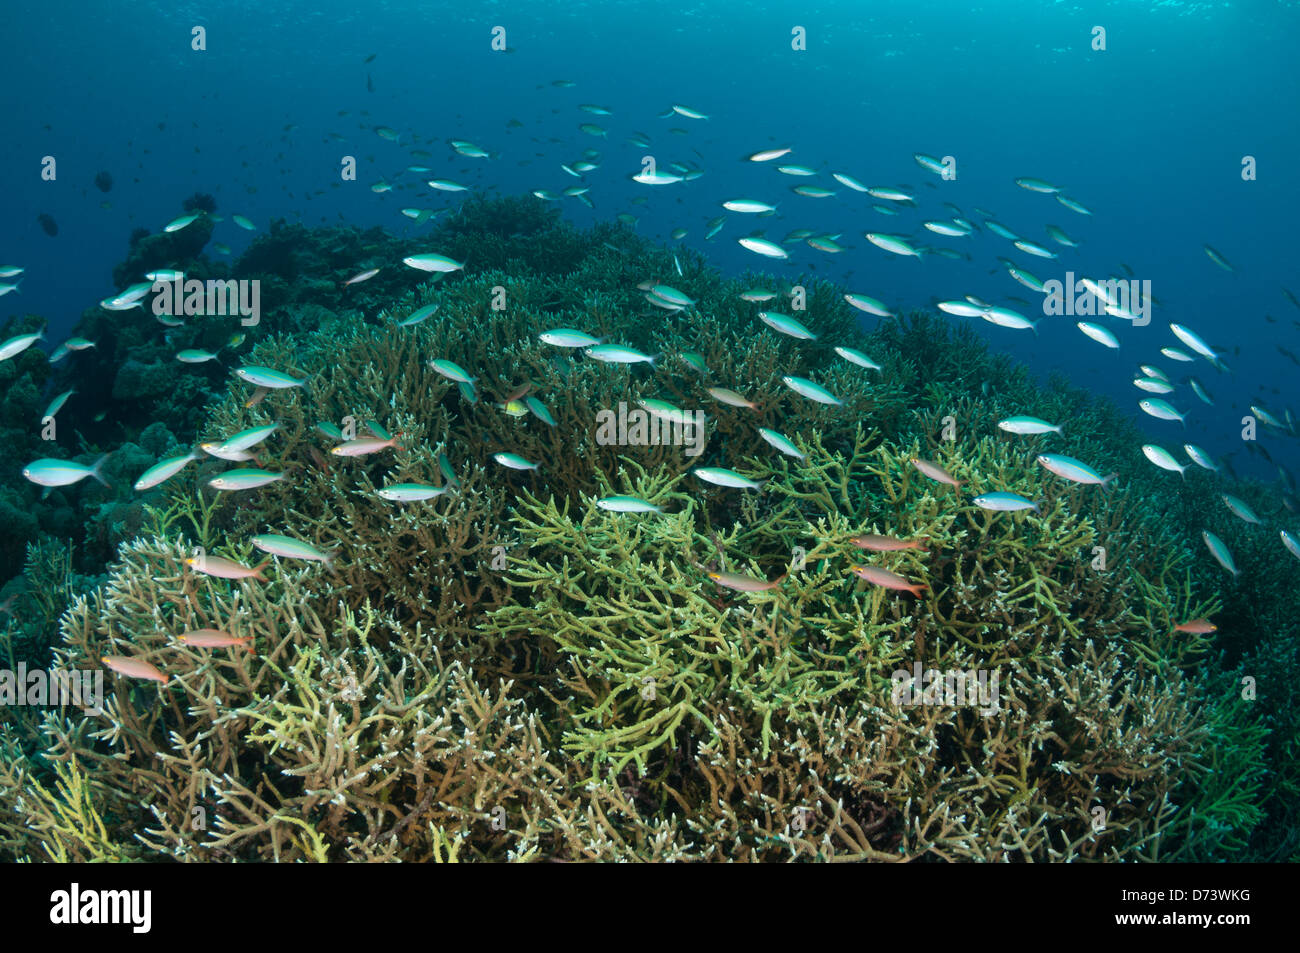 A school of fusiliers swims over a large patch of hard coral reef Stock Photo